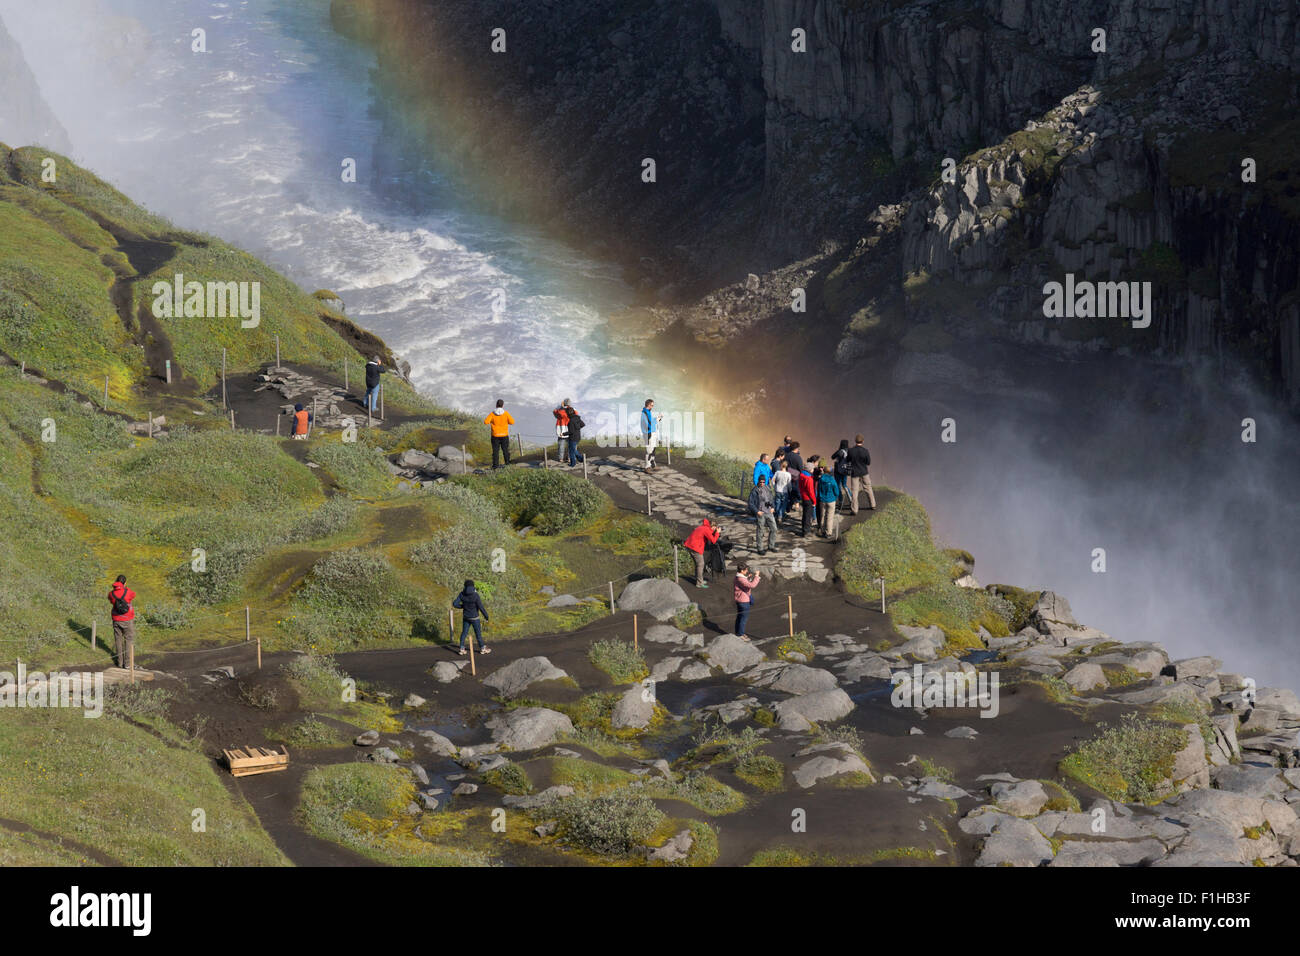 Tourists walking net to and viewing the Dettifoss waterfall with a rainbow behind in the mist, Vatnajökull National Park, northeast Iceland Stock Photo